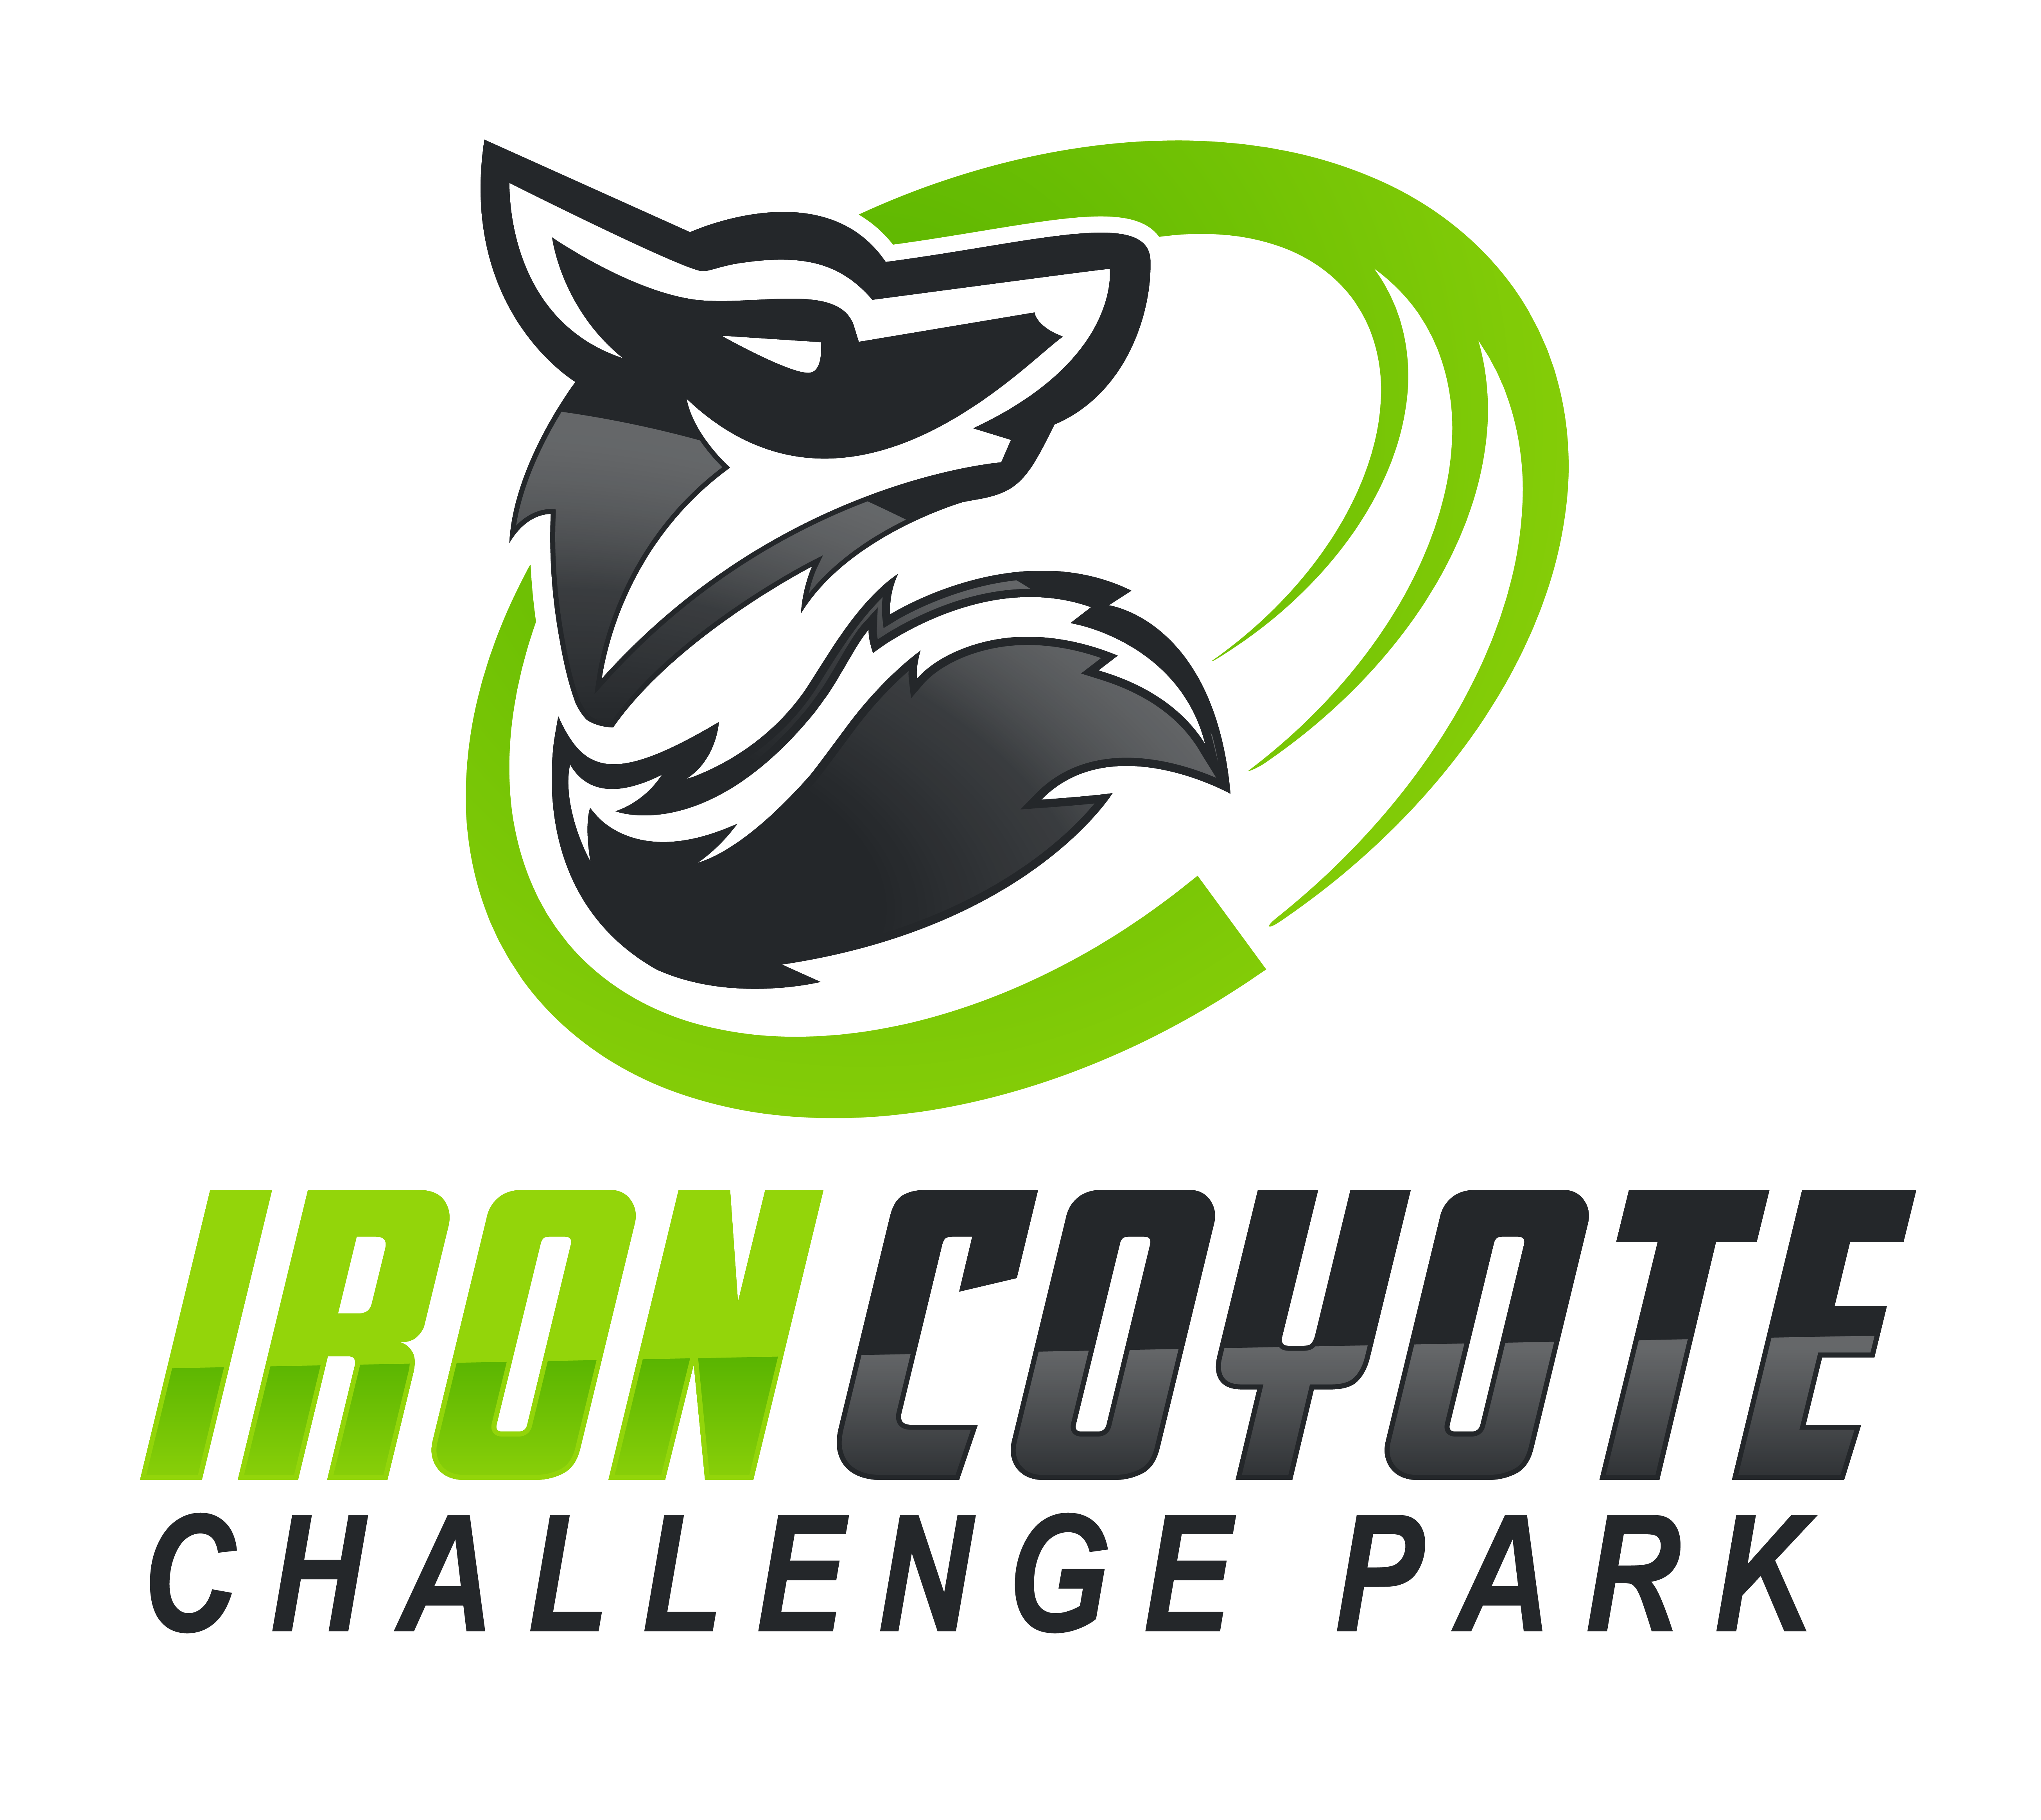 Events at Iron Coyote Challenge Park in BLOOMINGTON, IL by Yaymaker